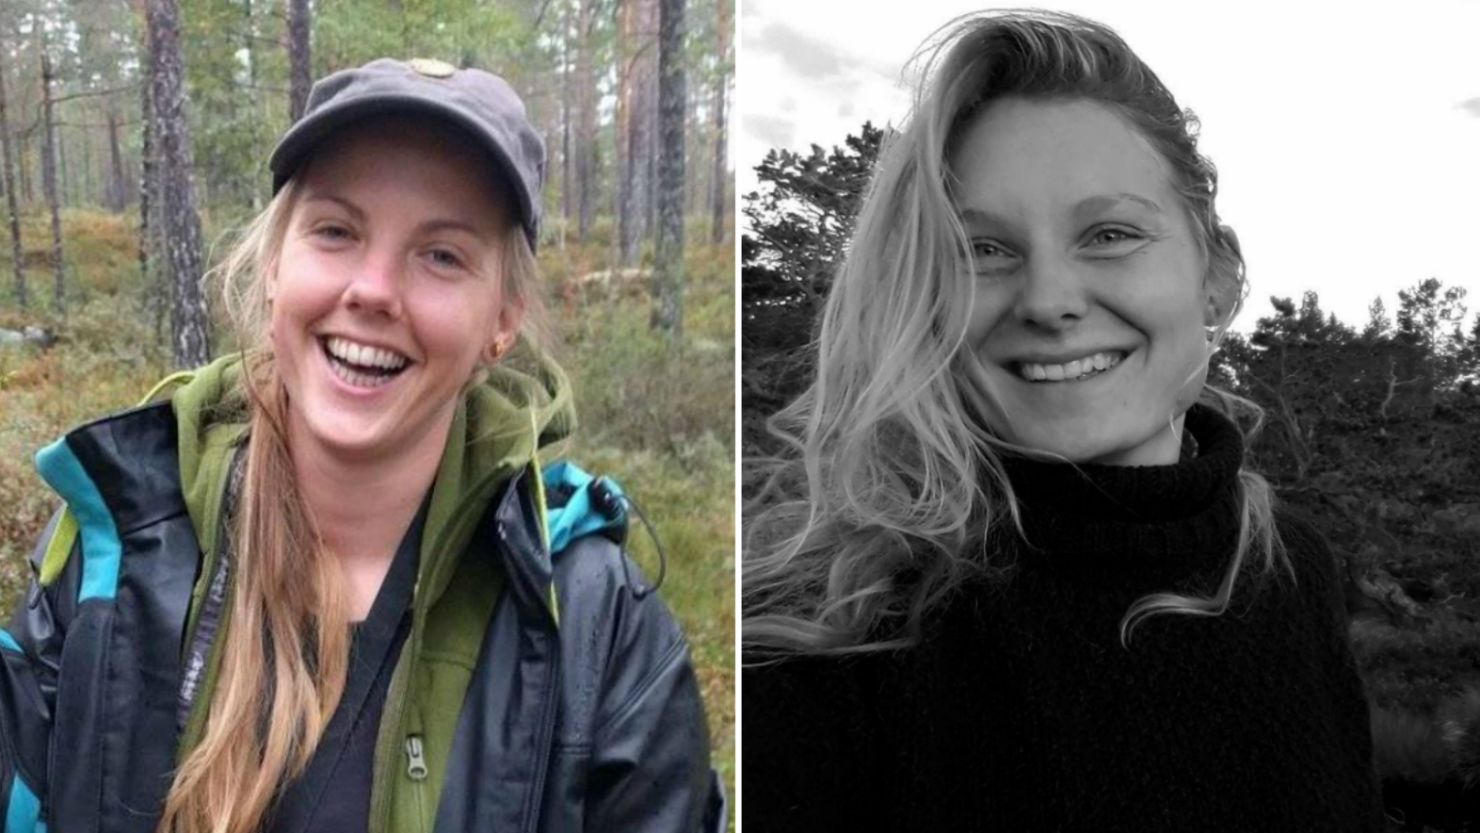 The bodies of Maren Ueland, 28 (left) and Louisa Jespersen, 24, (right) were discovered in Morocco's High Atlas mountain range last December. 